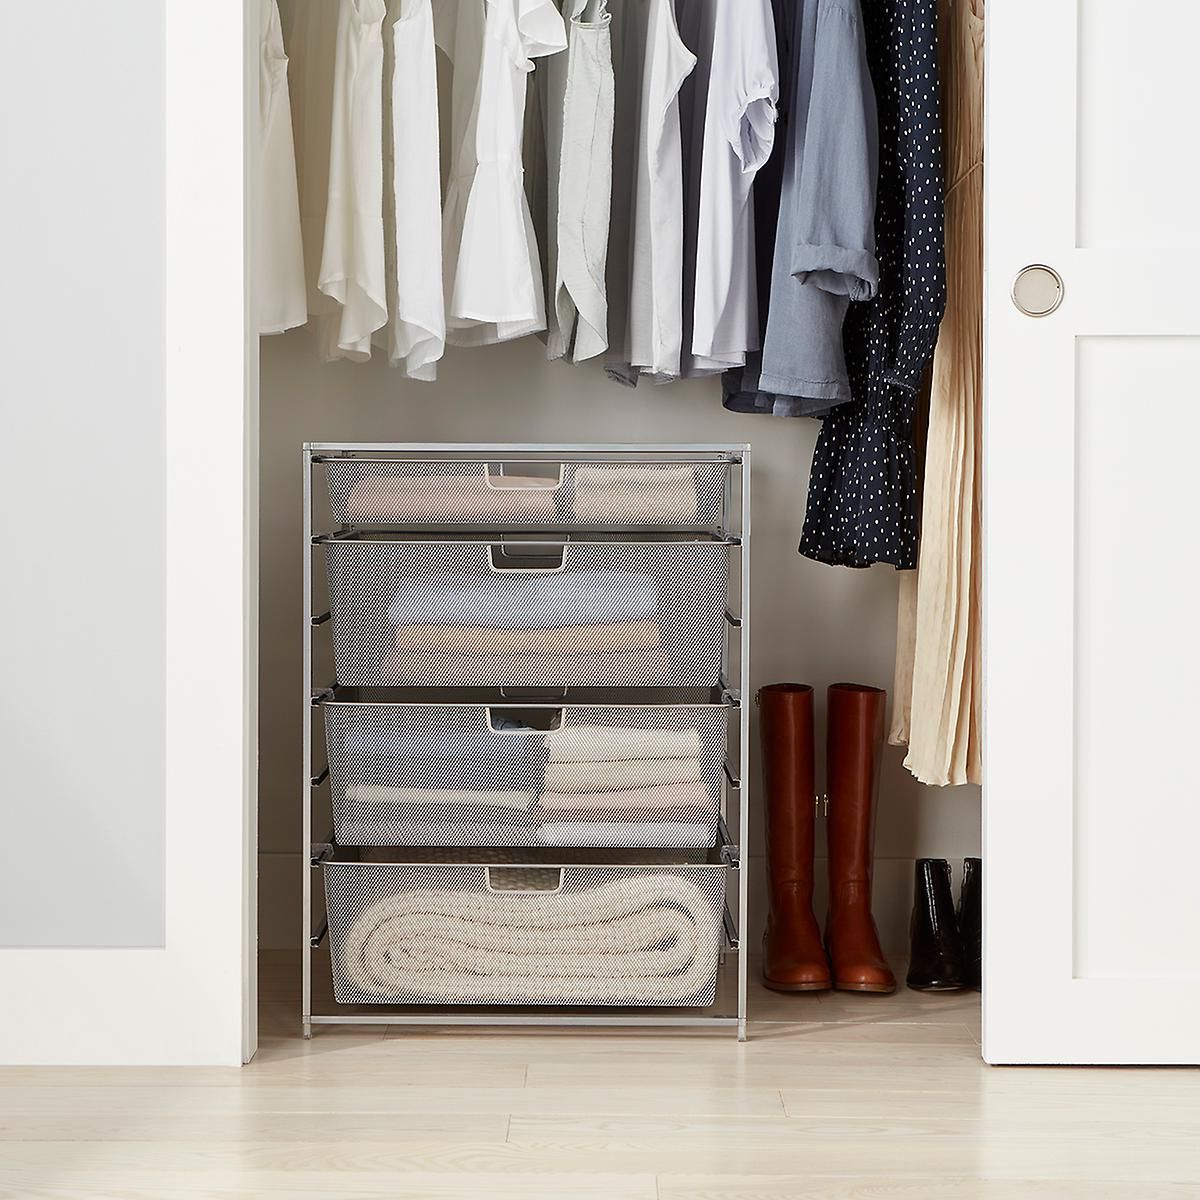 2018 35 Best Closet Organization Ideas To Maximize Space For Clothes Organizer Wardrobes (View 8 of 10)